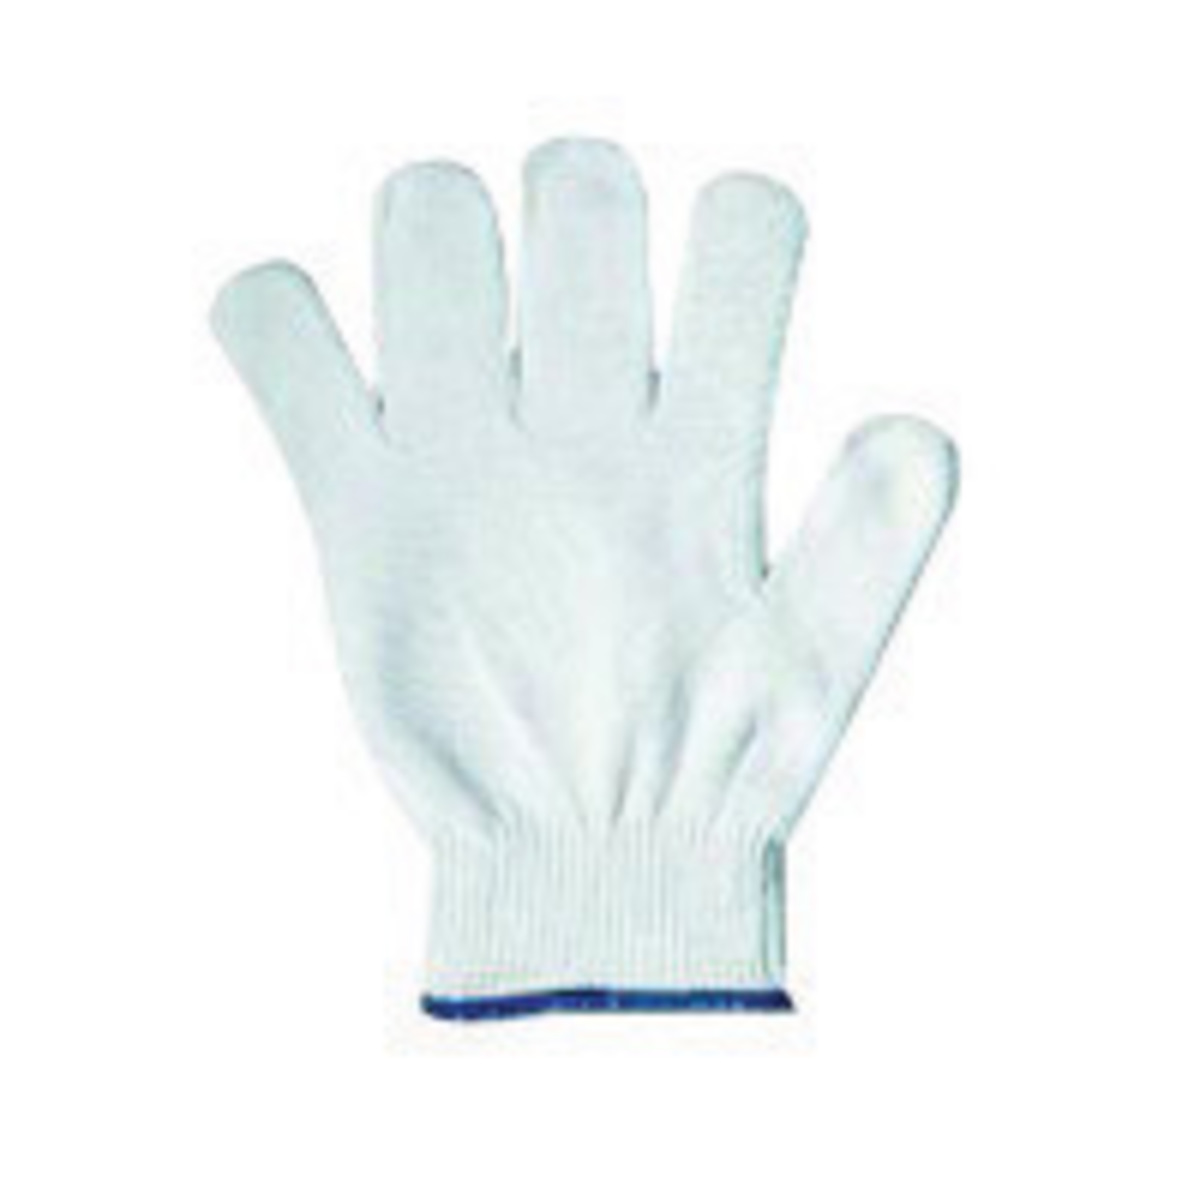 Inspection Gloves for Sale online at autumn supply